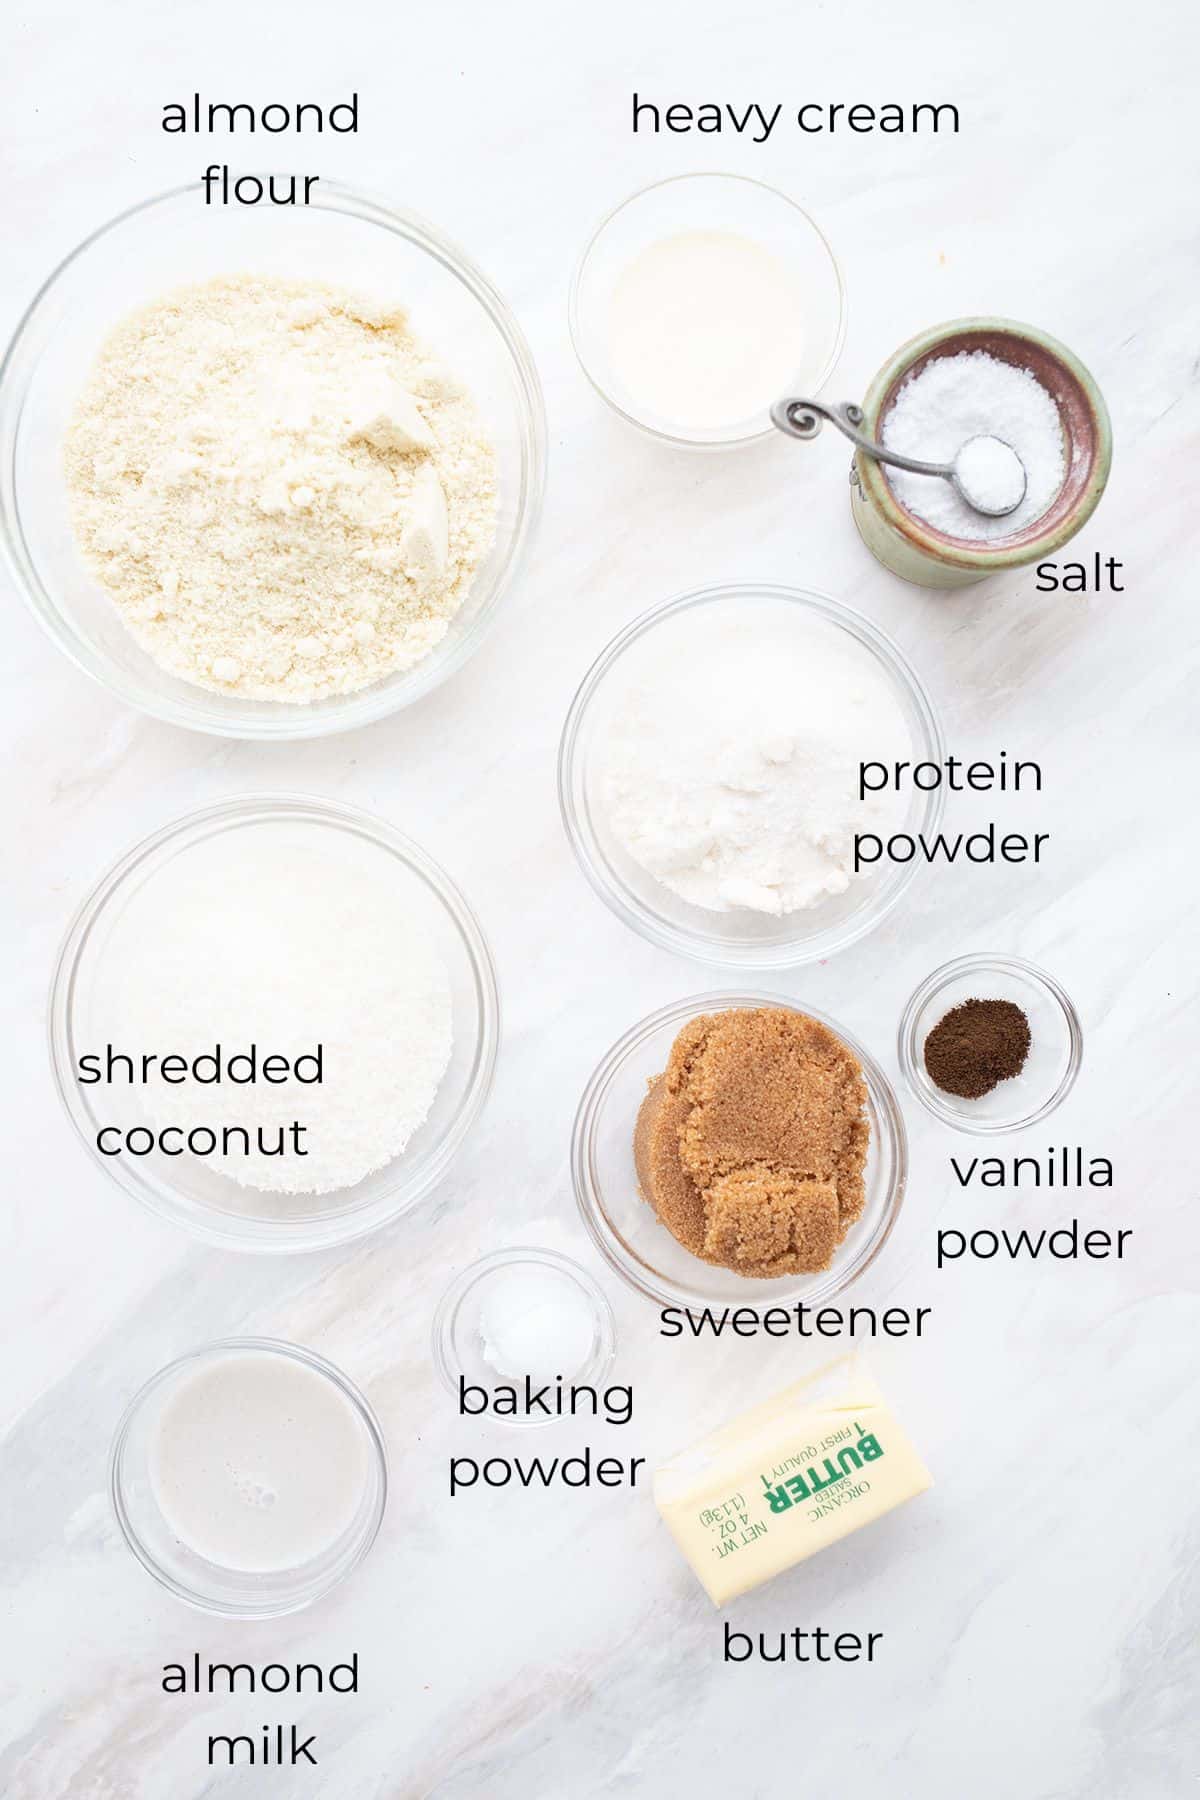 Top down image of ingredients needed for Danish Dream Cake.